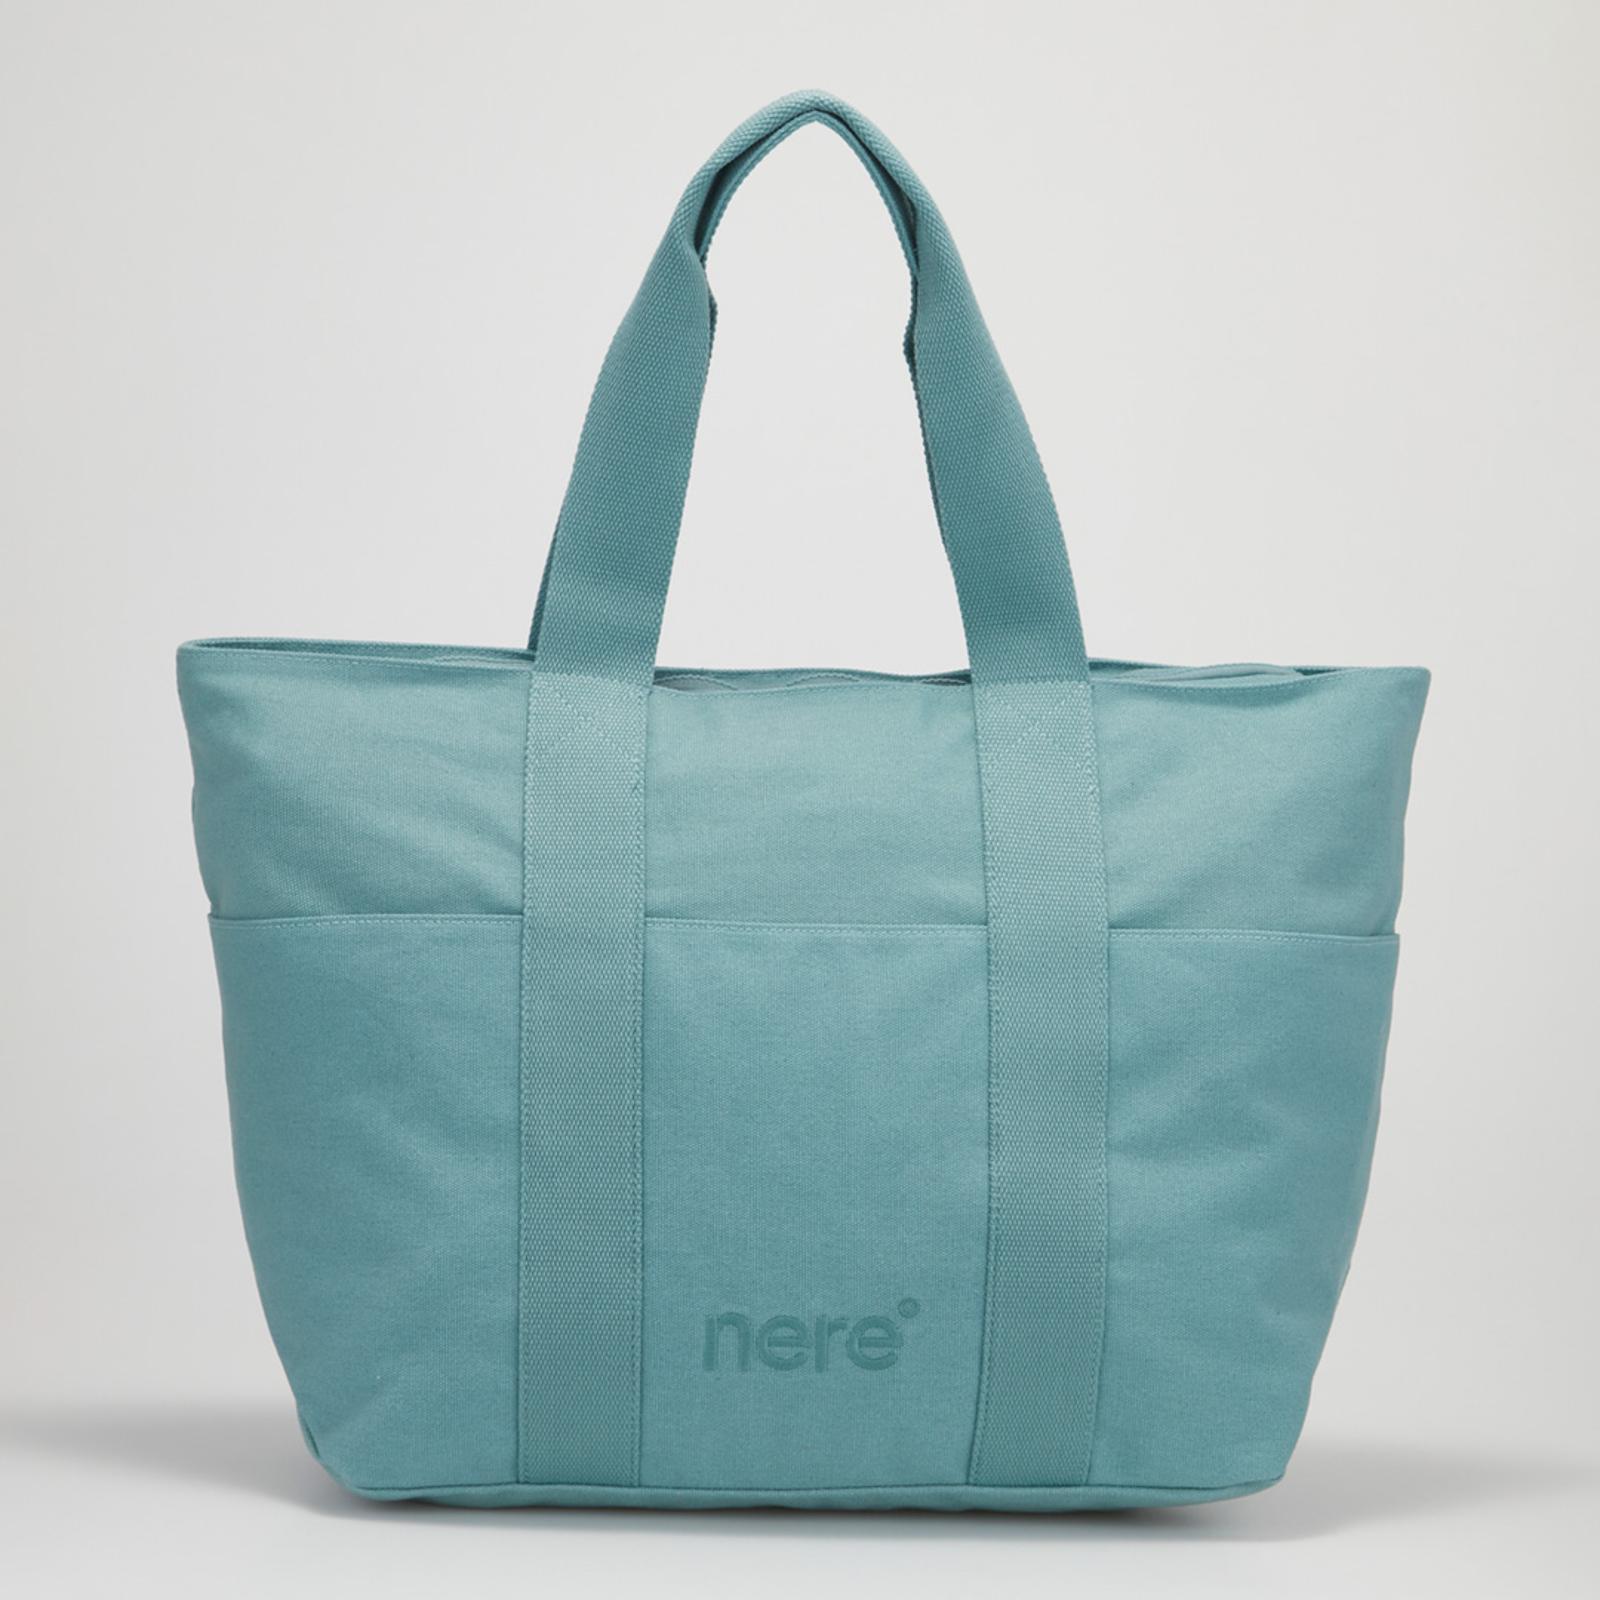 nere travel bag review